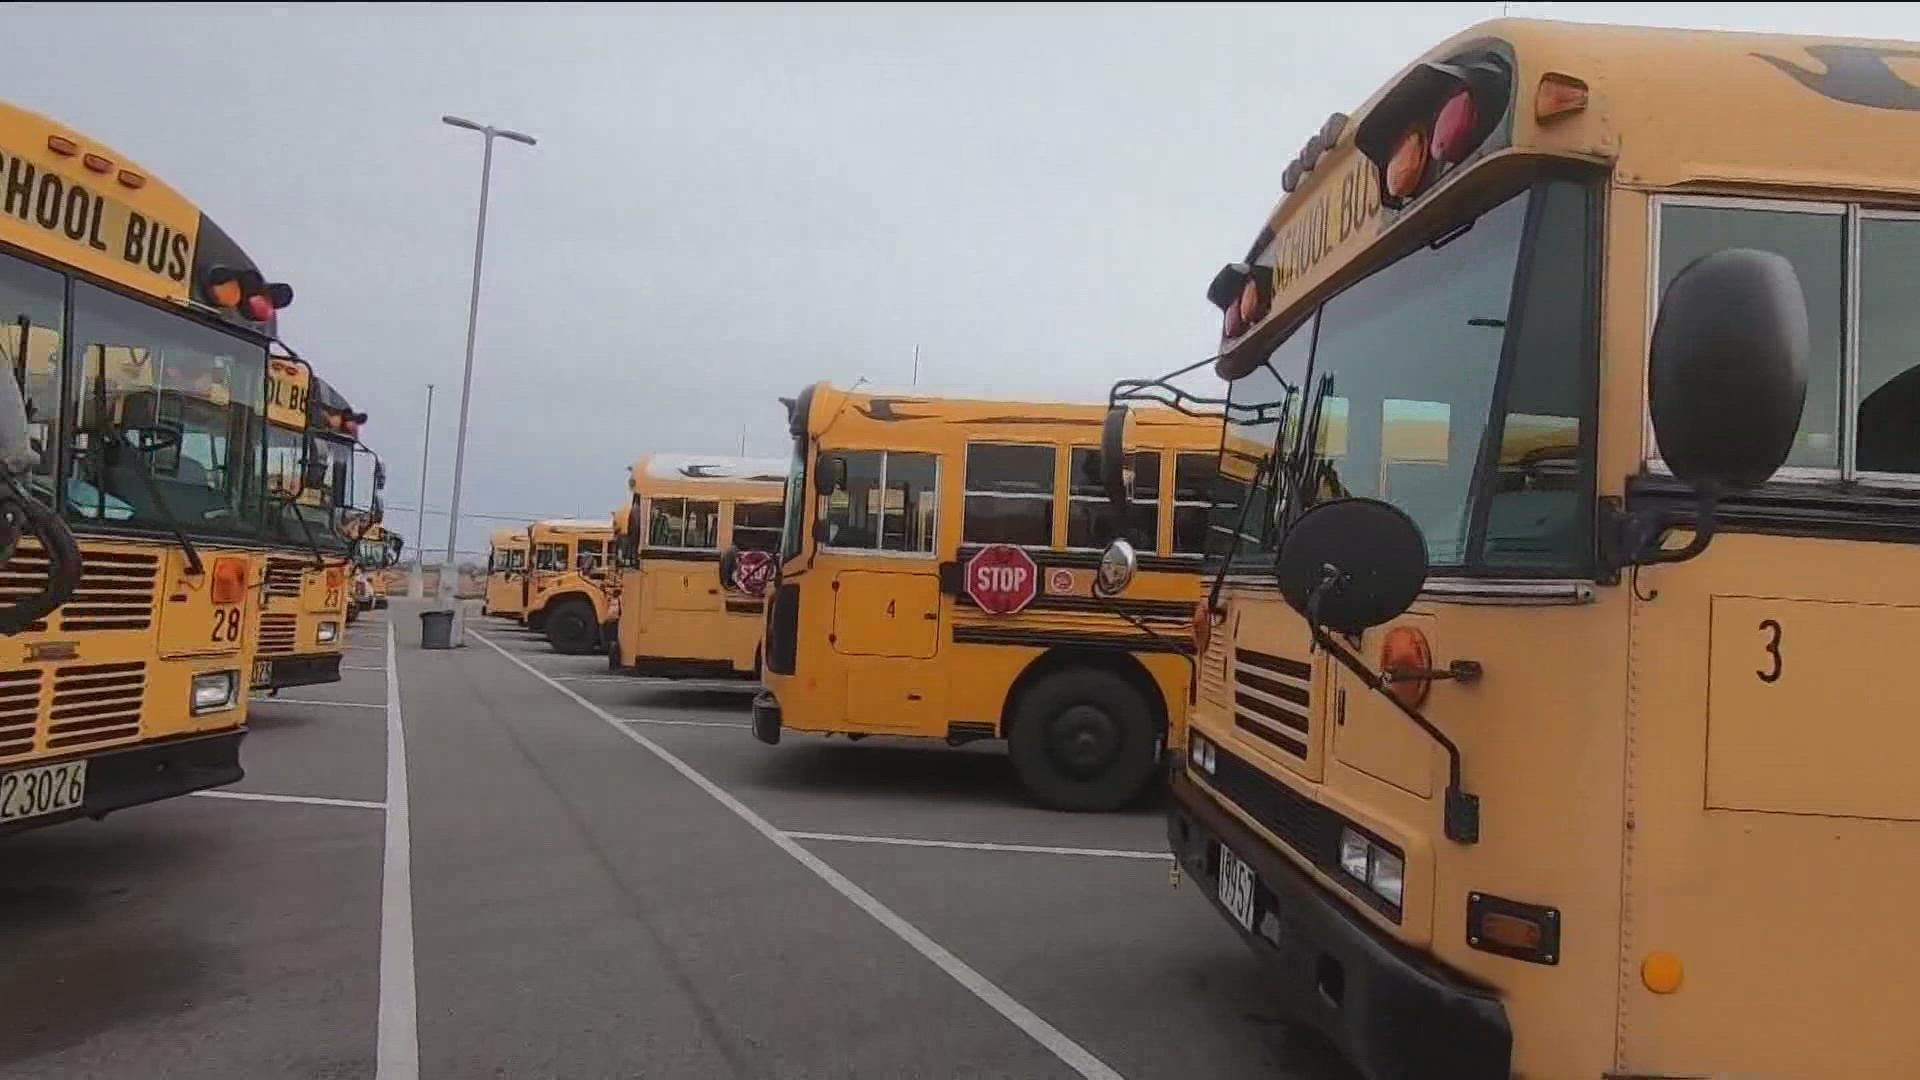 Bowling Green City Schools Supt. Francis Scruci said training and certification for bus drivers can take up to six months to complete.